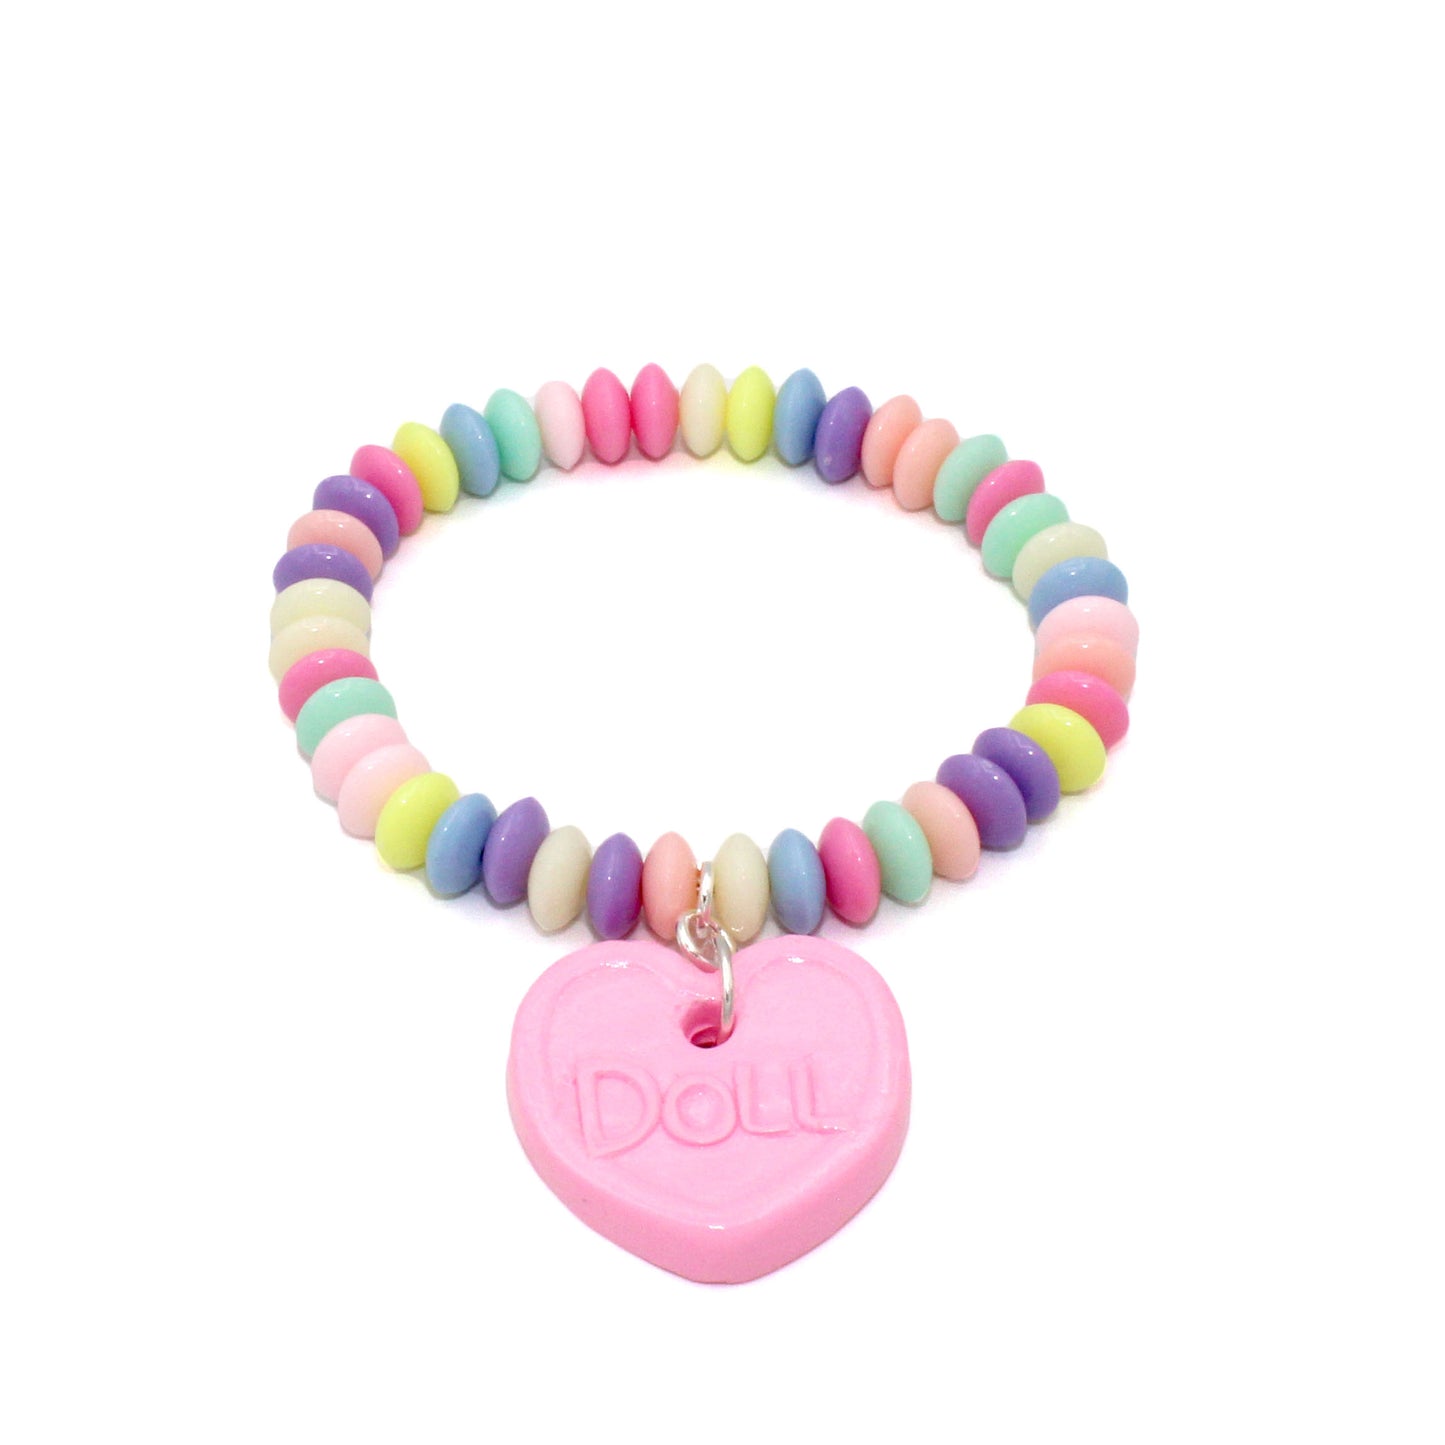 Pastel Faux Candy Bracelet - Custom Name or Word Available